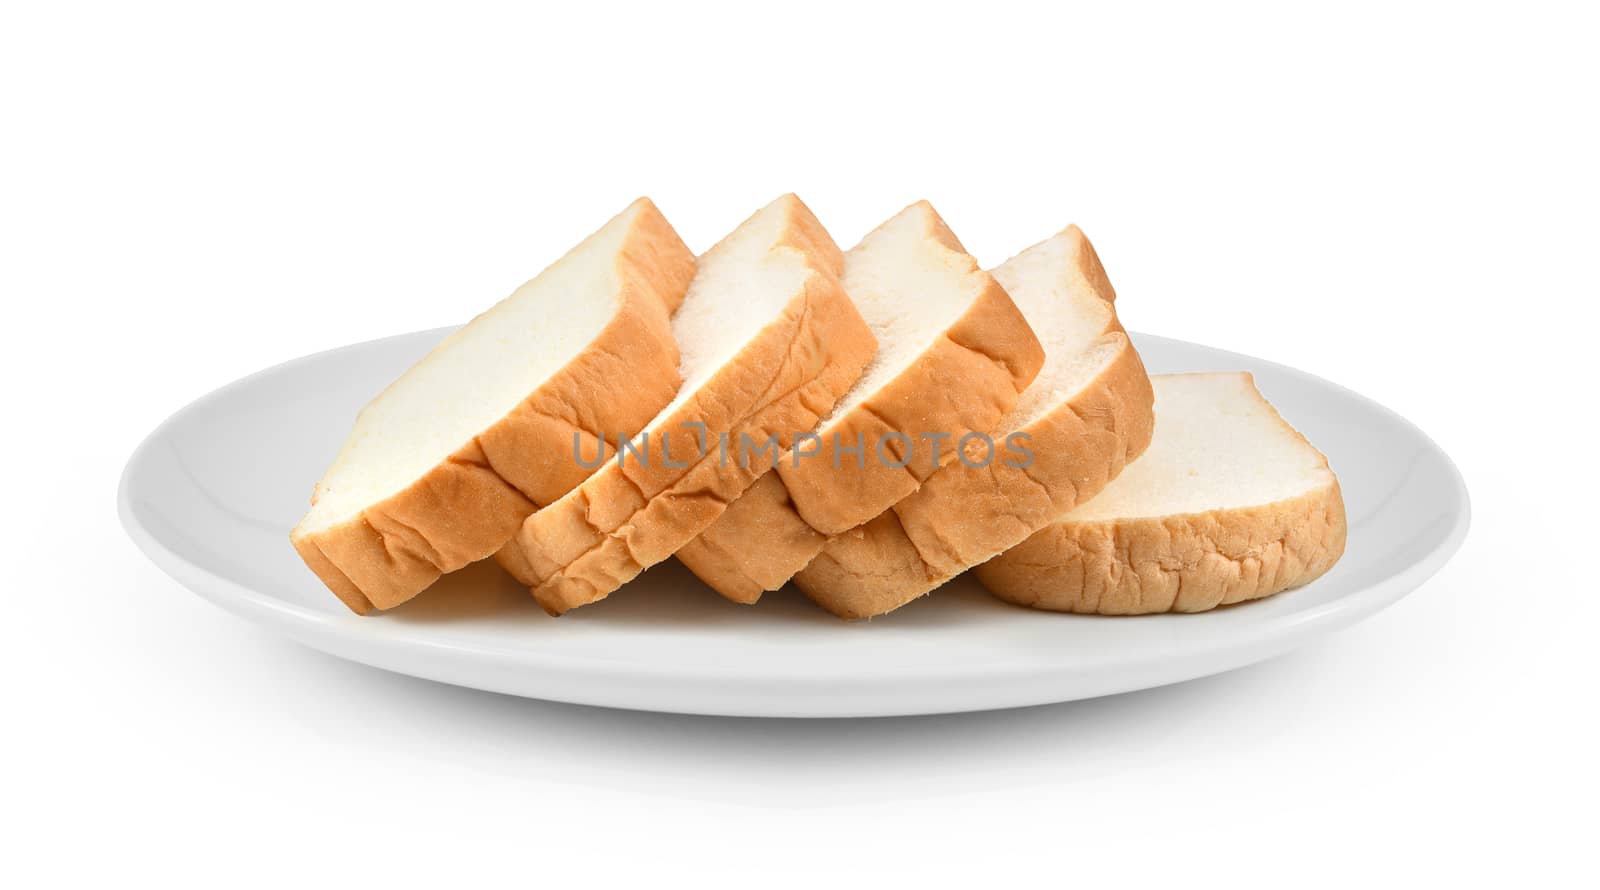 sliced bread in plate isolated on white background by sommai